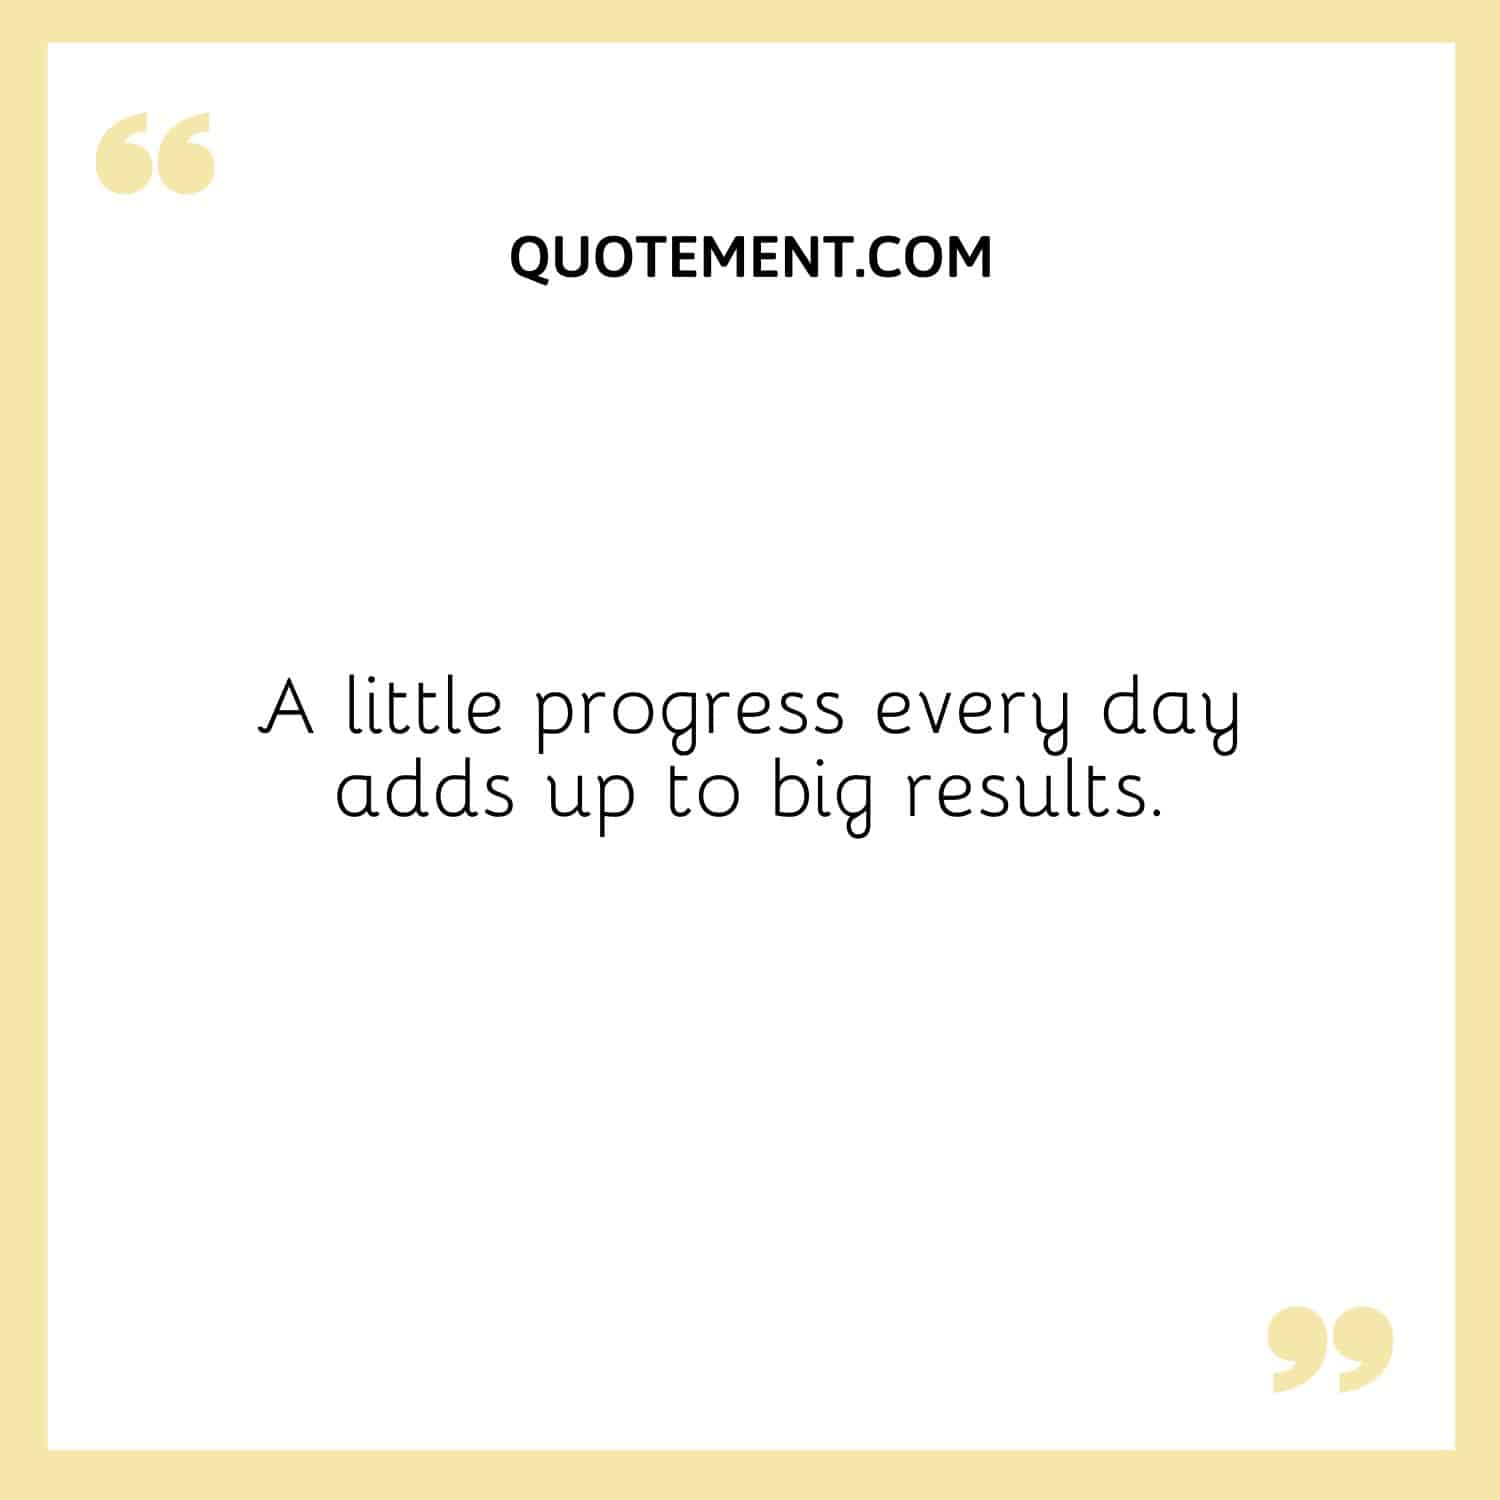 A little progress every day adds up to big results.